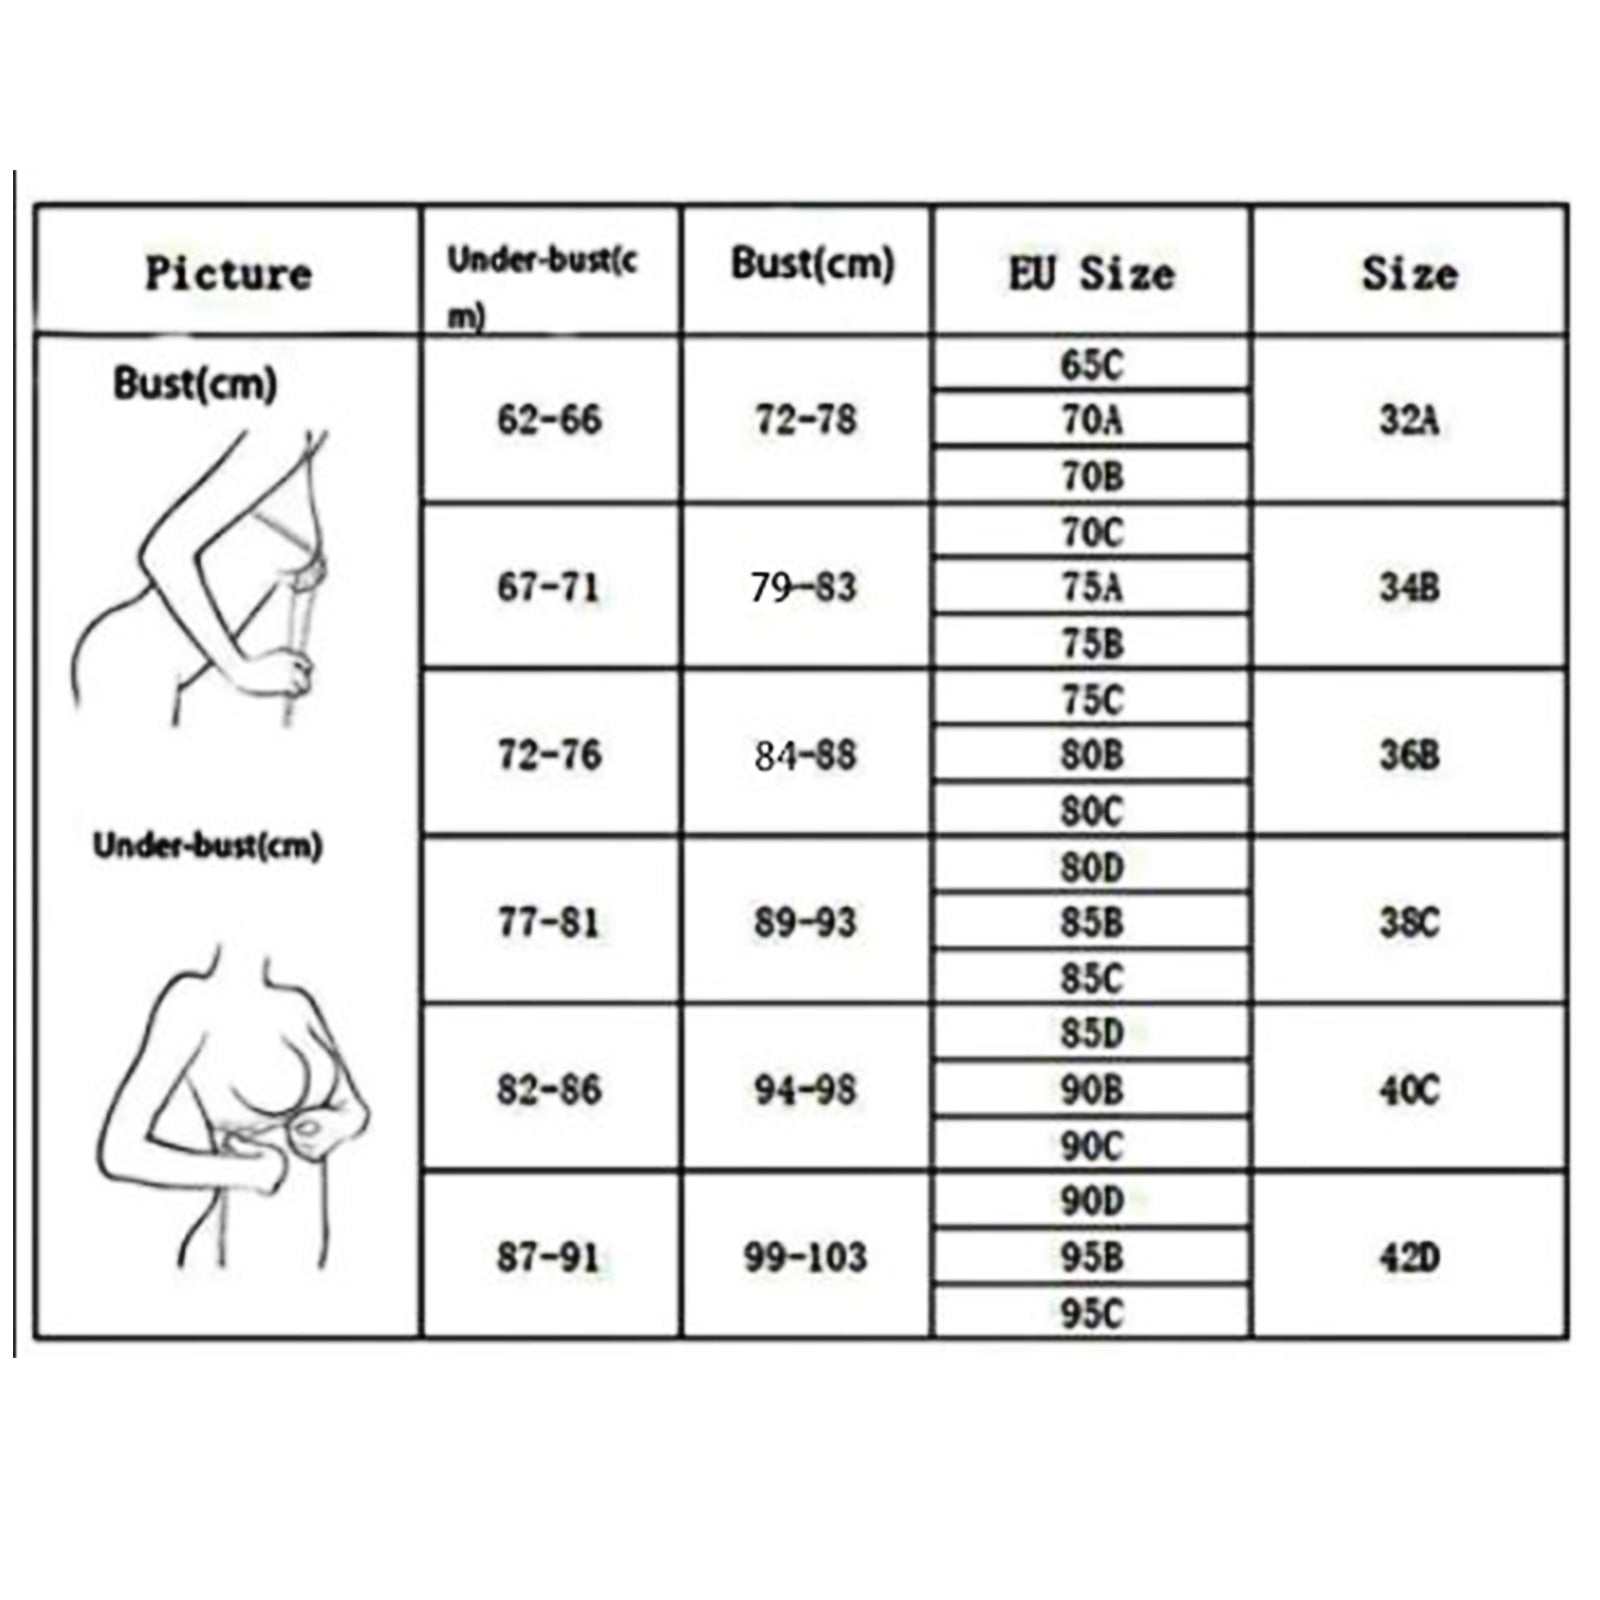 Women Crop Top Sexy Embroidery Sequins Nightclub Party Bra as Outwear Detachable Strap Corset with Cups Push Up Bustier YH1080